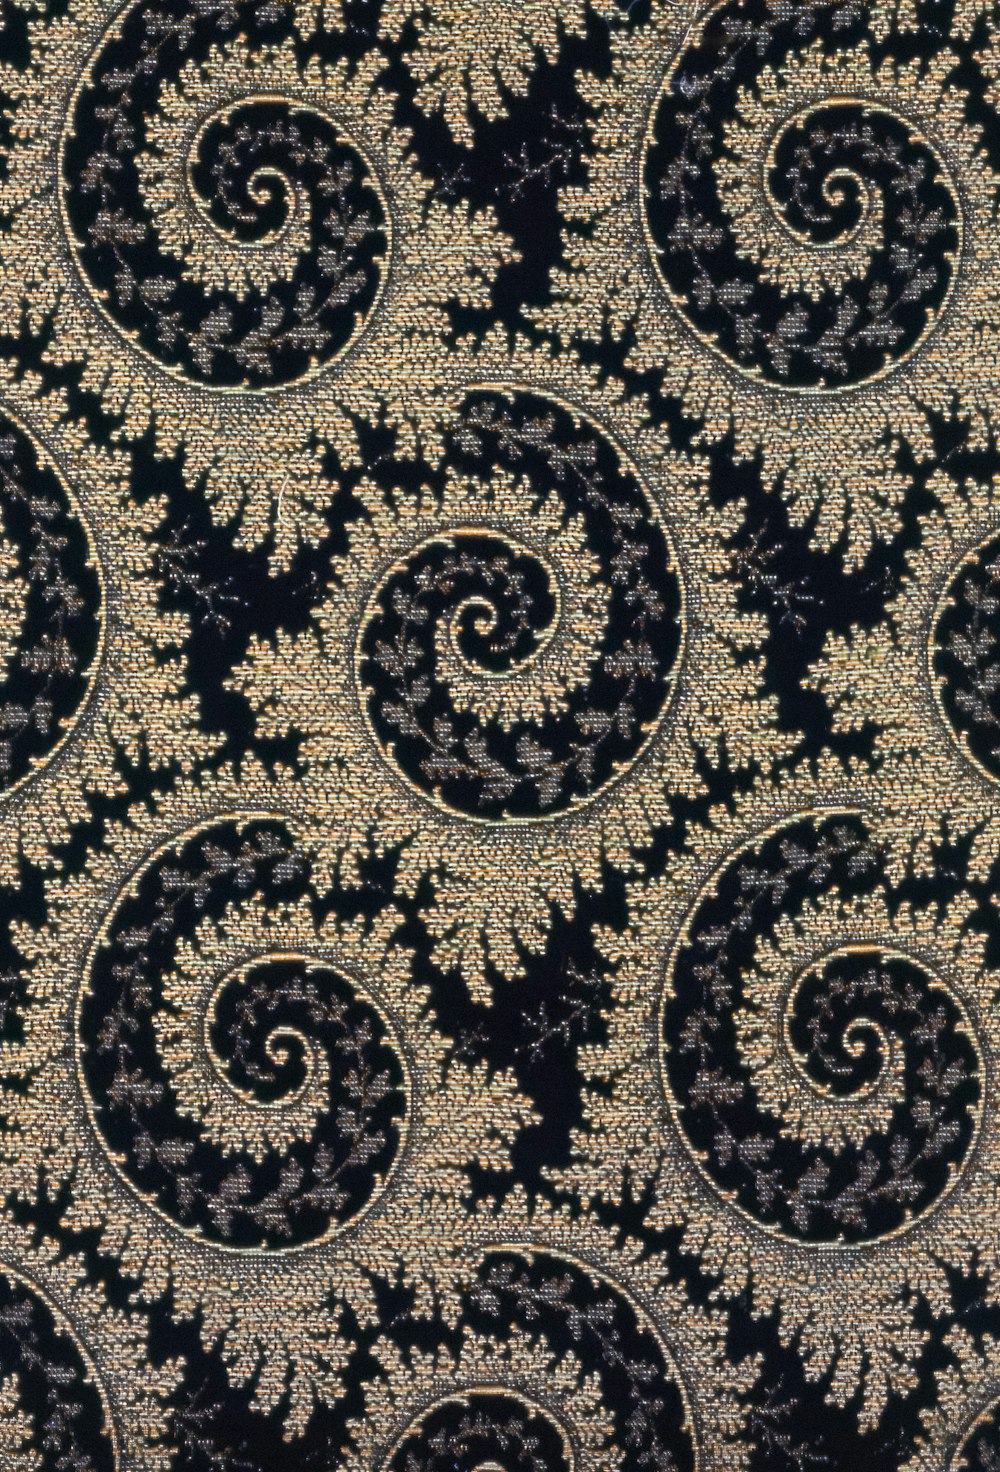 a close up of a black and gold wallpaper